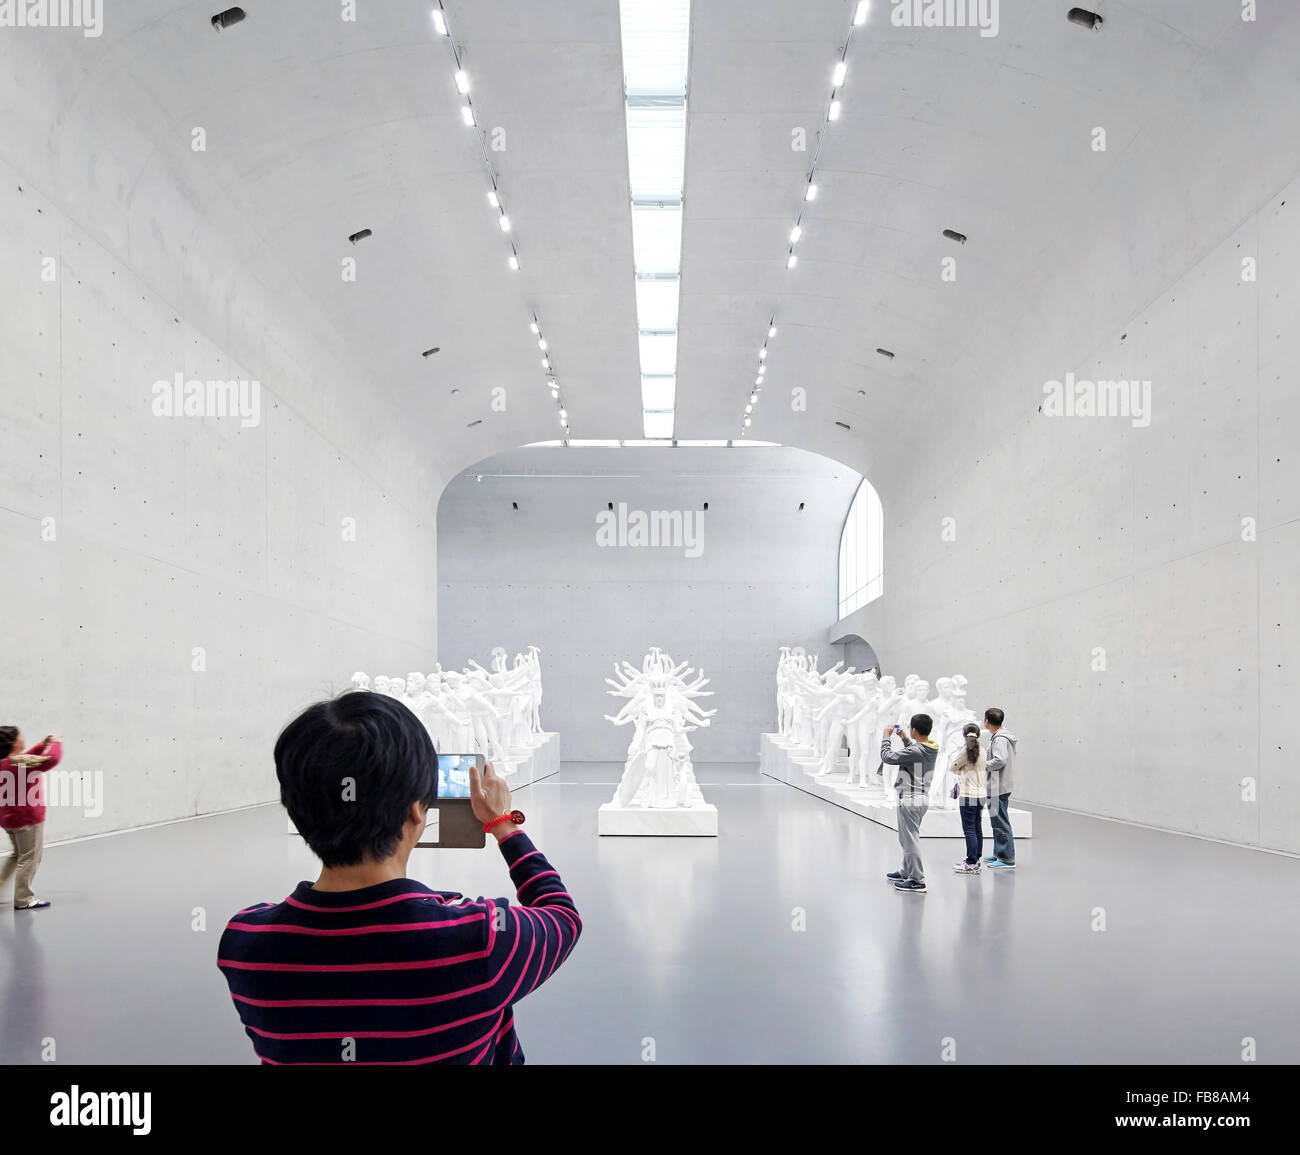 Exhibition hall with visitors. Long Museum West Bund, Shanghai, China. Architect: Atelier Deshaus, 2015. Stock Photo